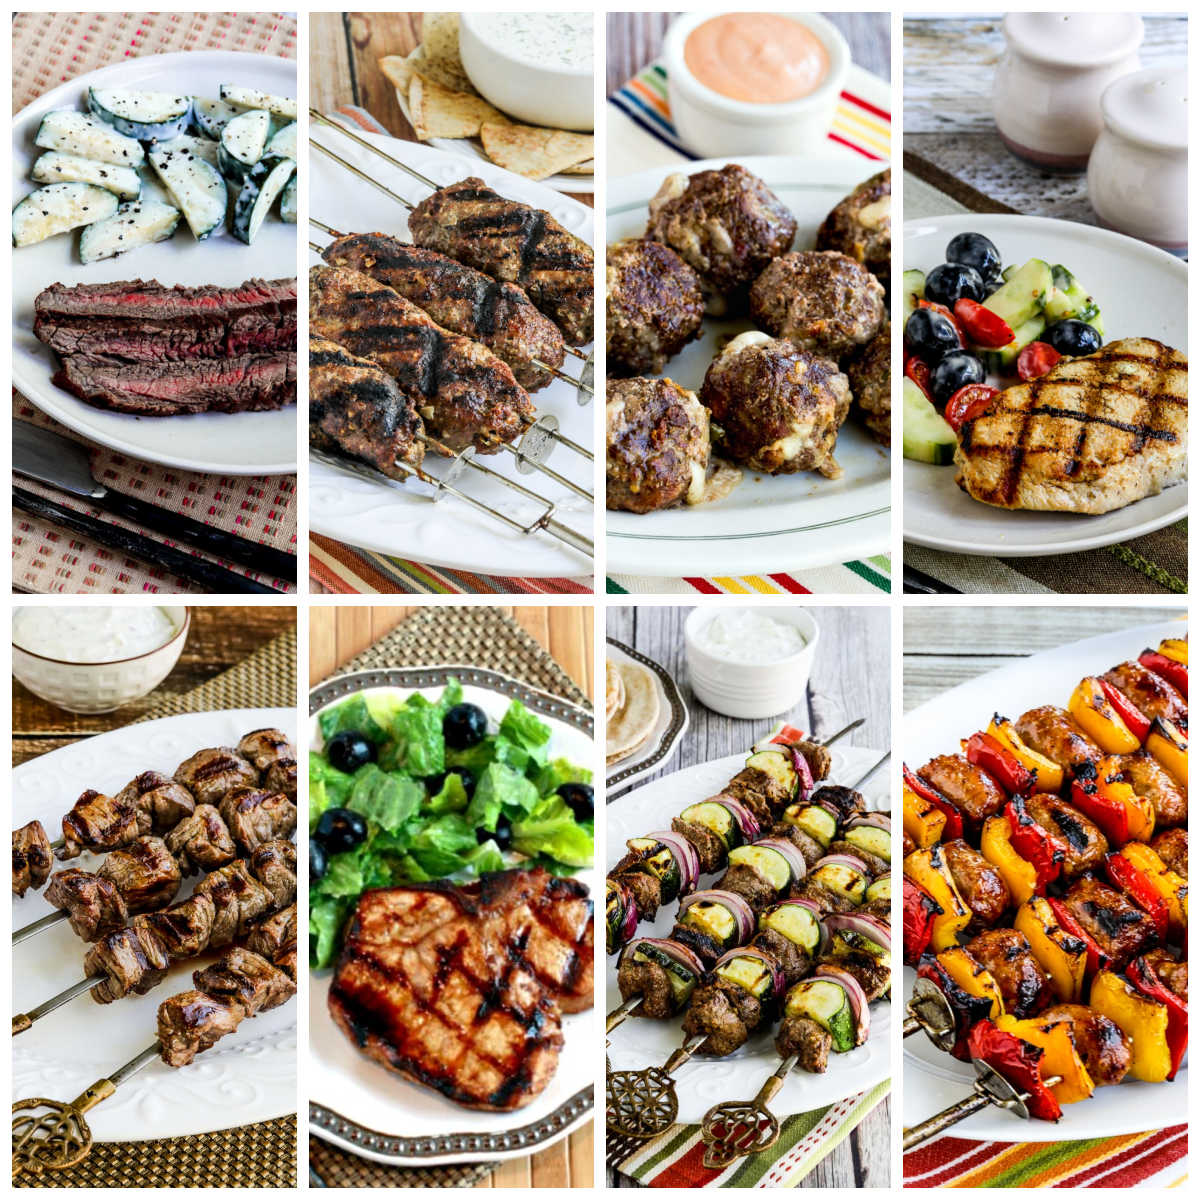 Keto Beef, Pork, or Lamb On the Grill